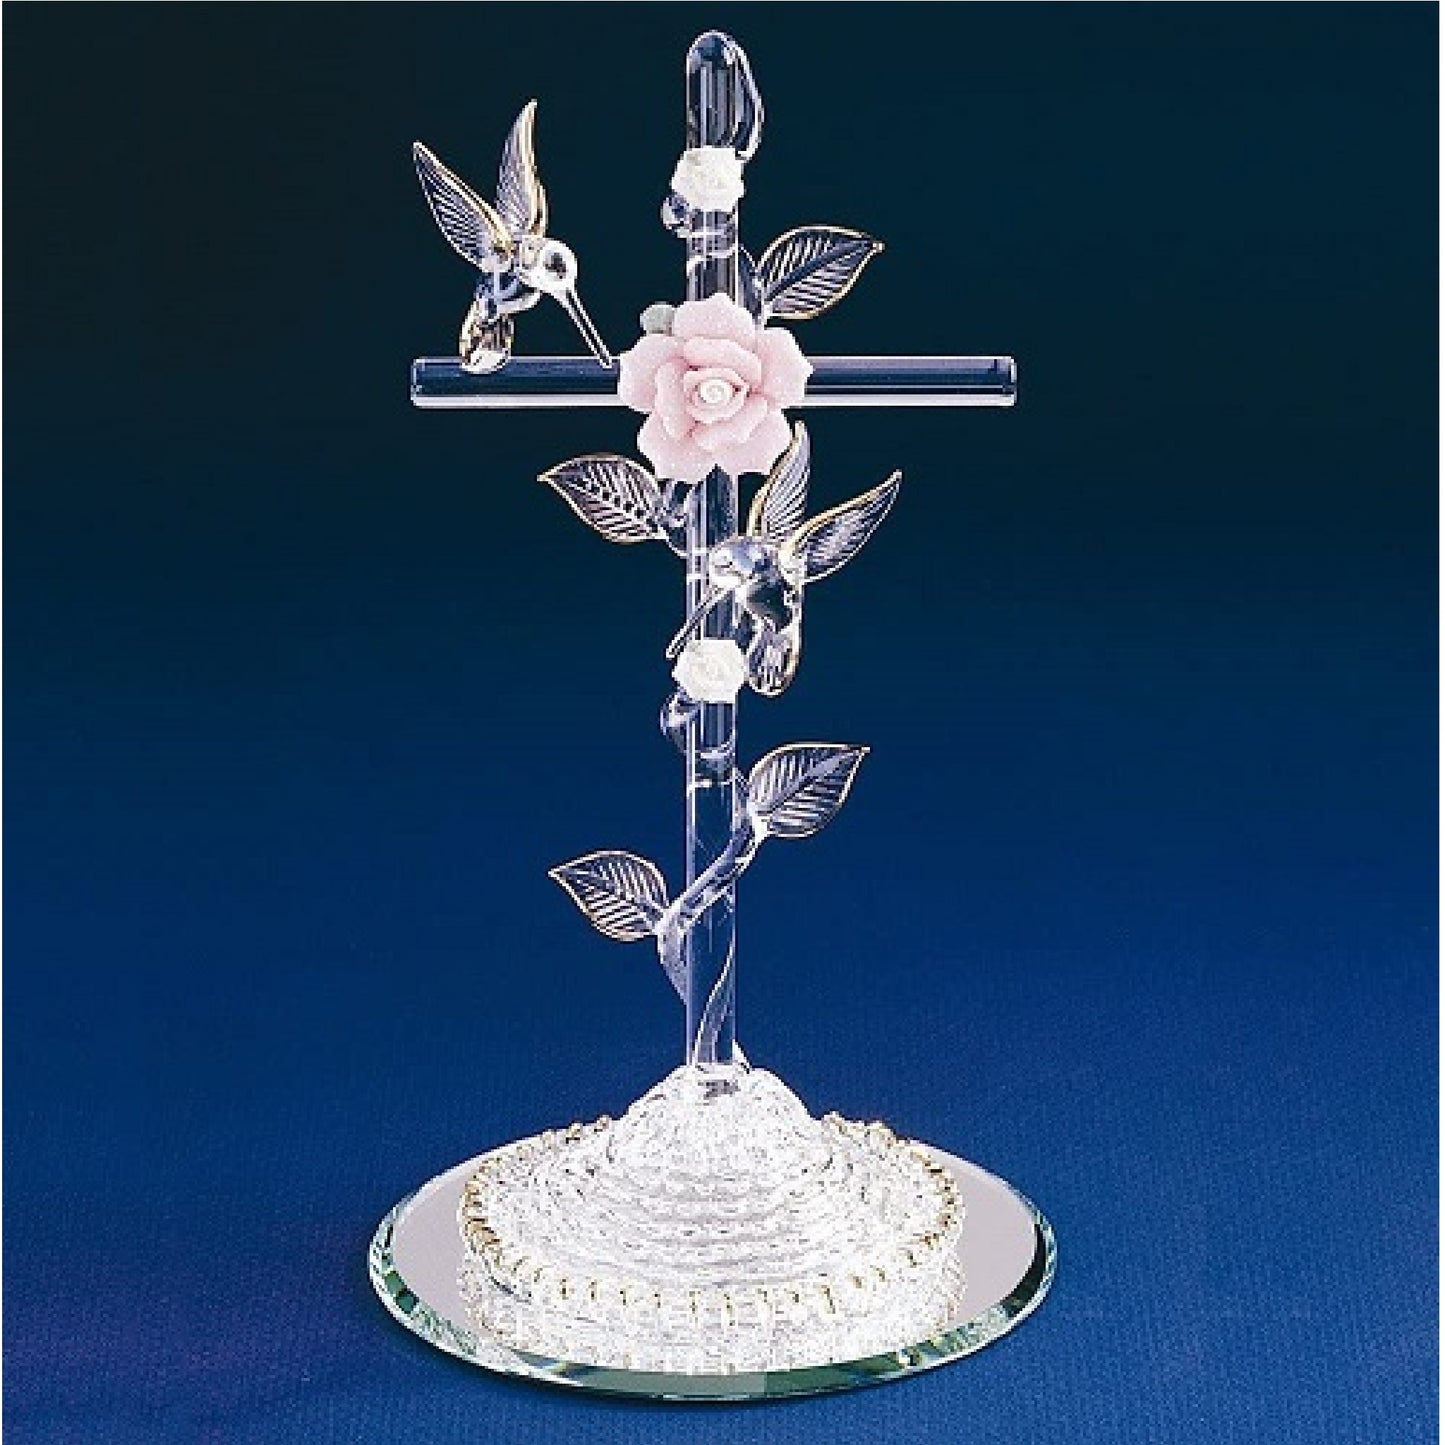 Glass Baron Cross with Pink Rose and Hummingbirds figurine